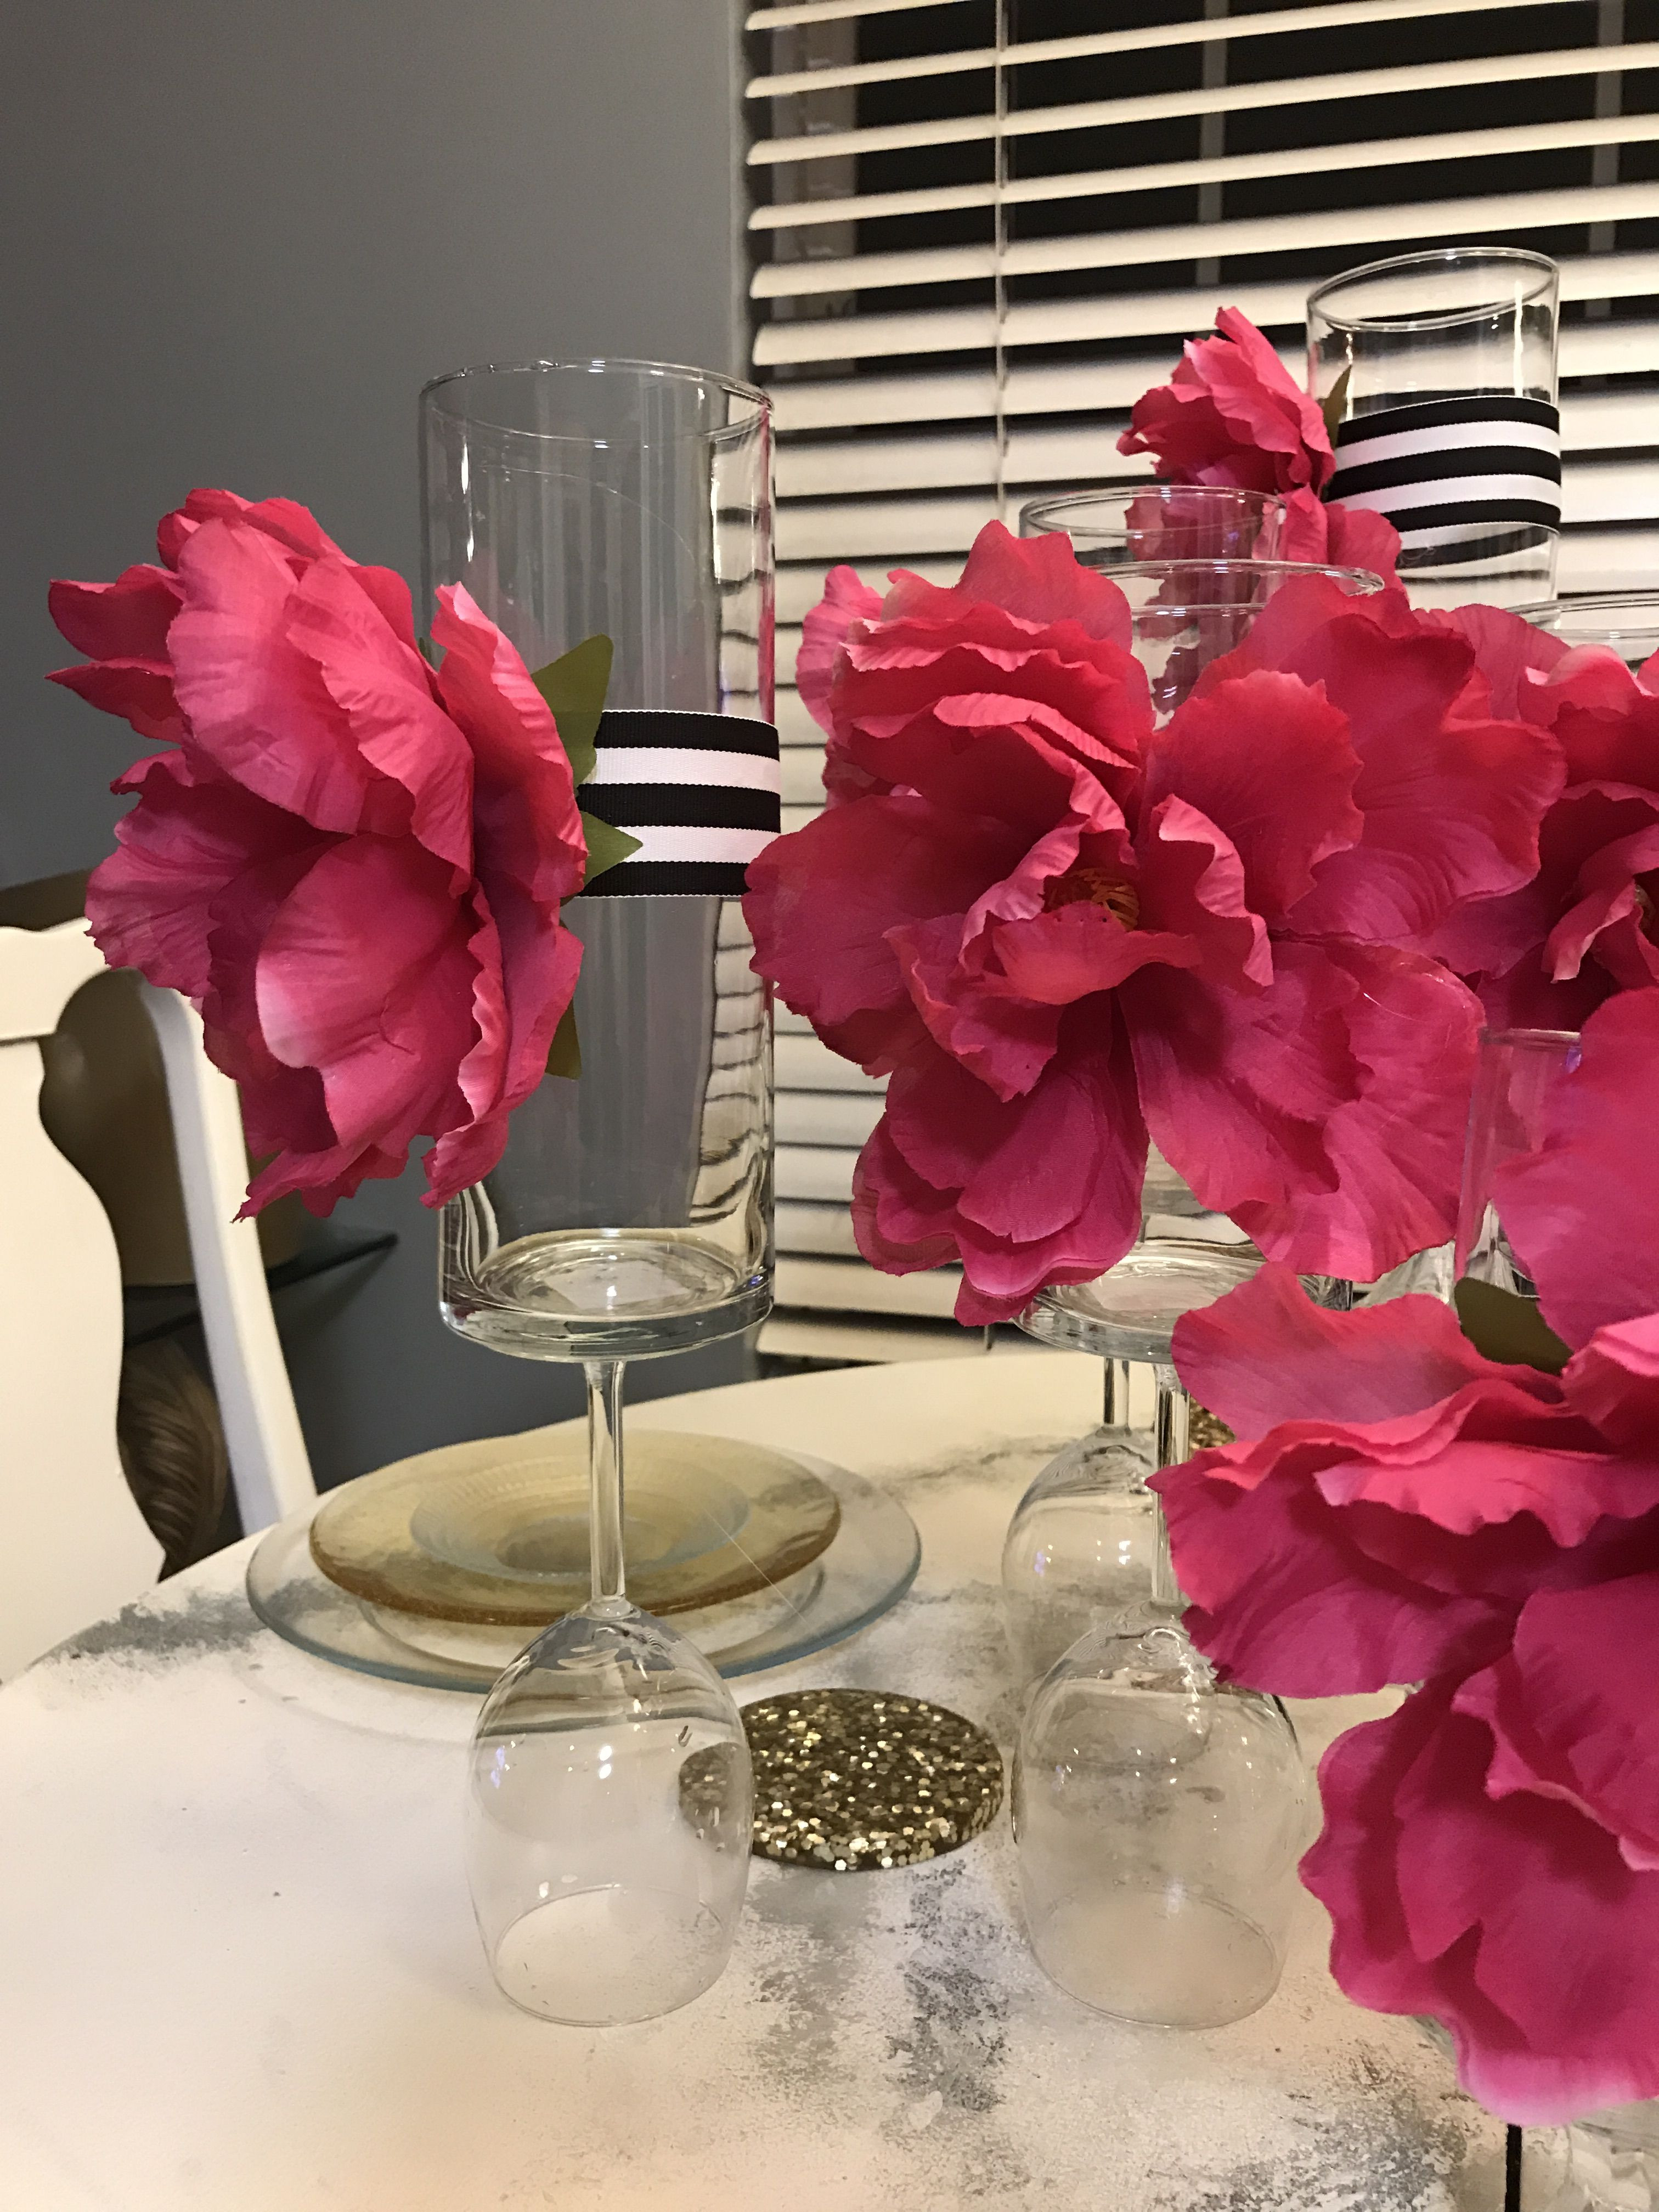 17 Stunning Custom Glass Vases 2024 free download custom glass vases of centerpieces diy flower centerpieces glass vase centerpiece kate with centerpieces diy flower centerpieces glass vase centerpiece kate spade inspired centerpieces women